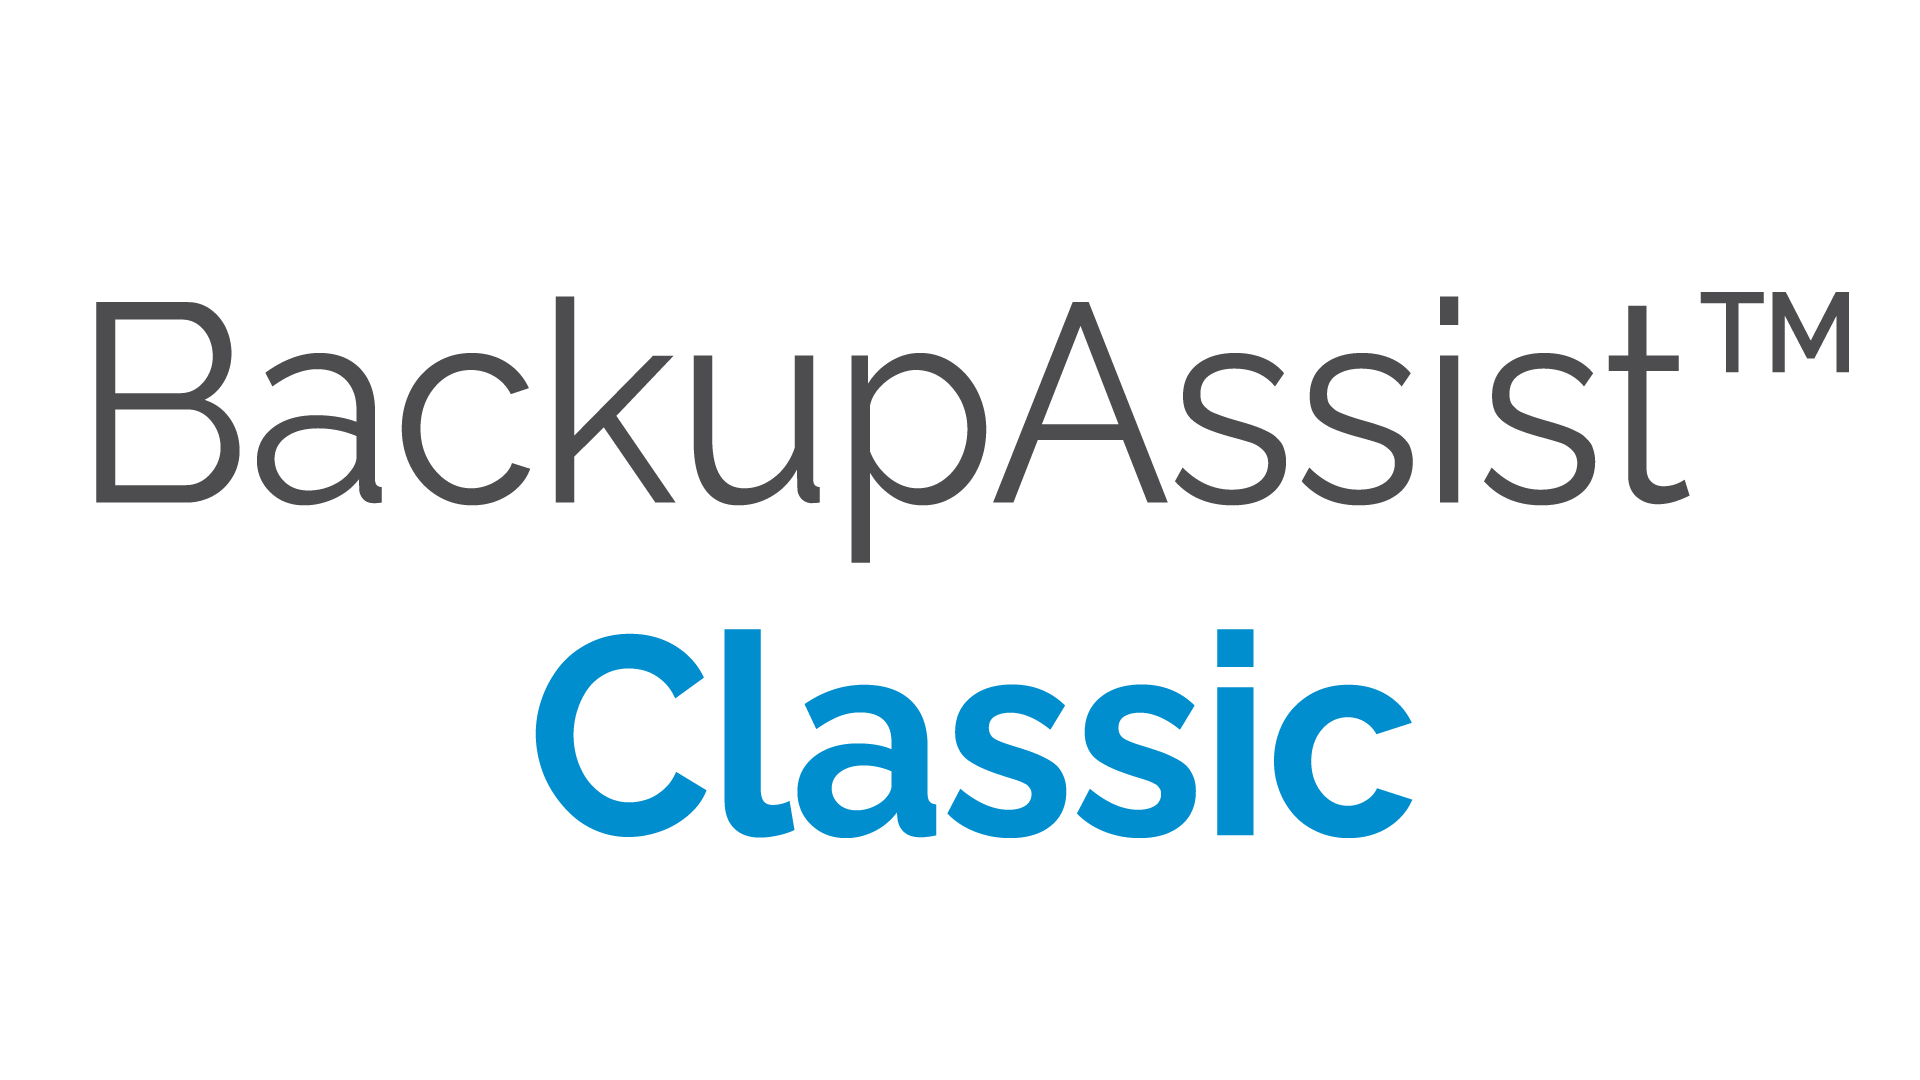 download the last version for iphoneBackupAssist Classic 12.0.5